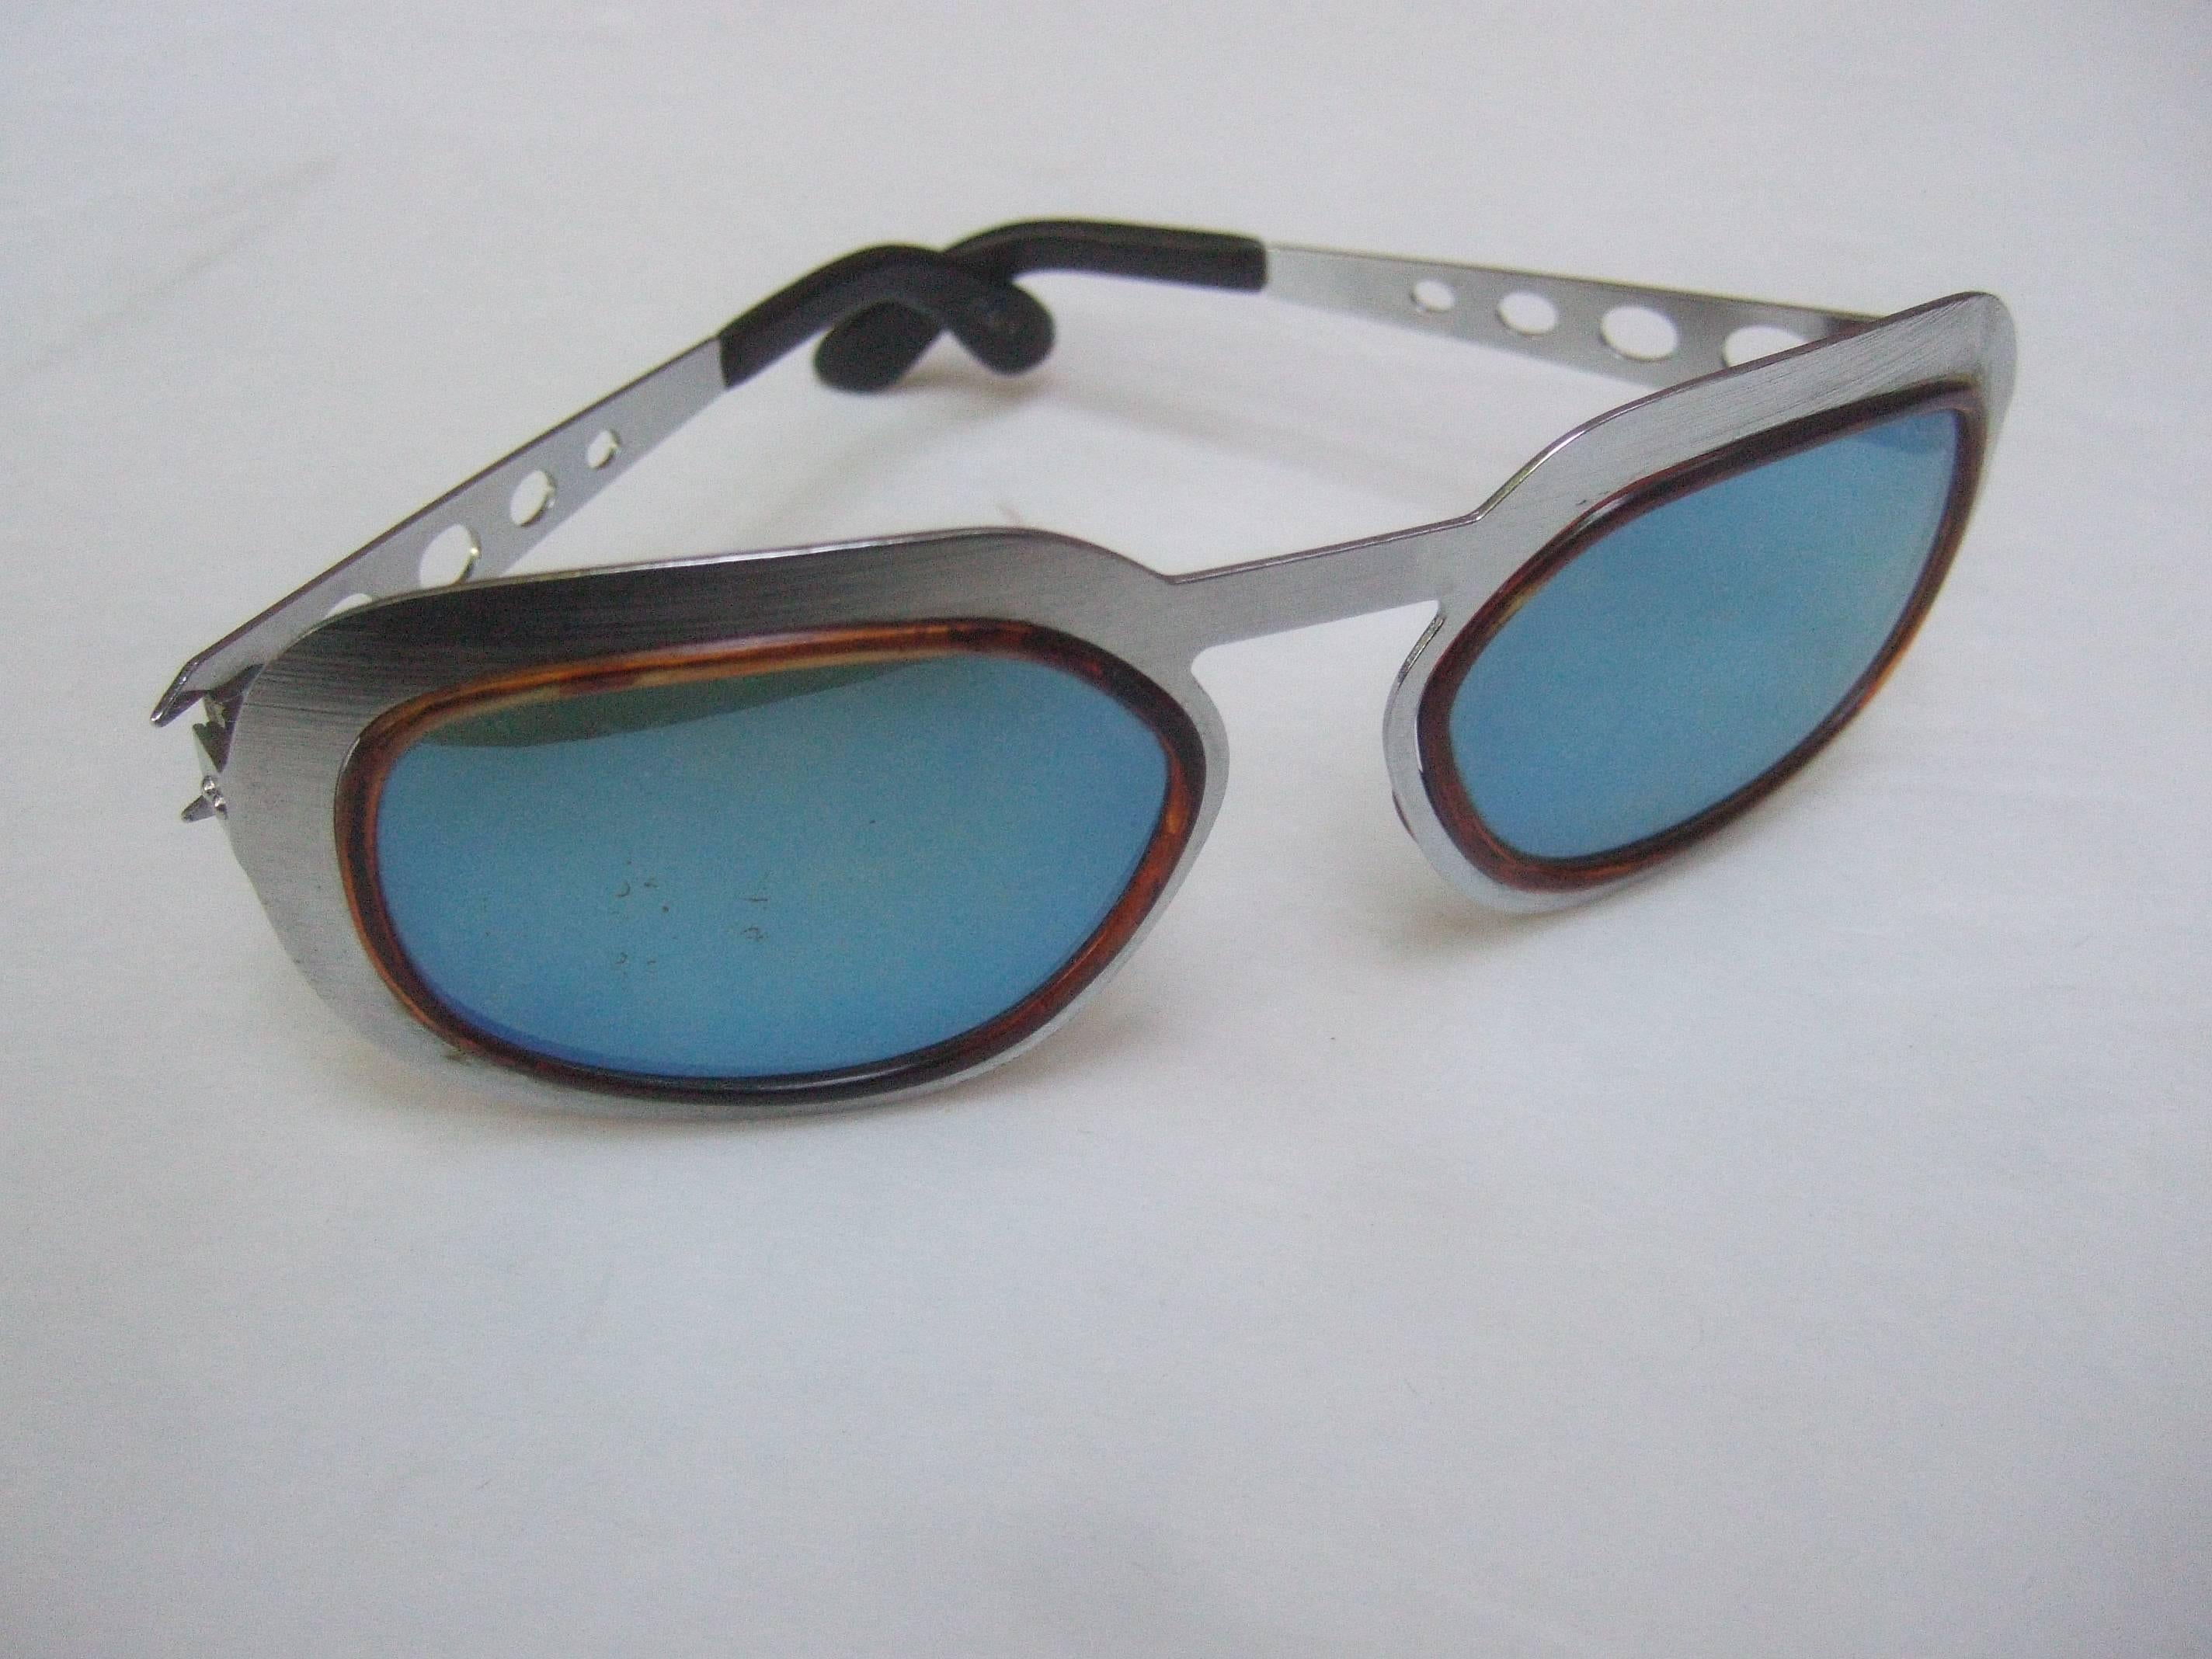 Mod Italian silver metal frame blue lens unisex sunglasses c 1970
The sleek Italian unisex sunglasses are designed with blue
tinted plastic lenses with a reflective mirrored coating

The tinted blue lenses are framed with subtle tortoise